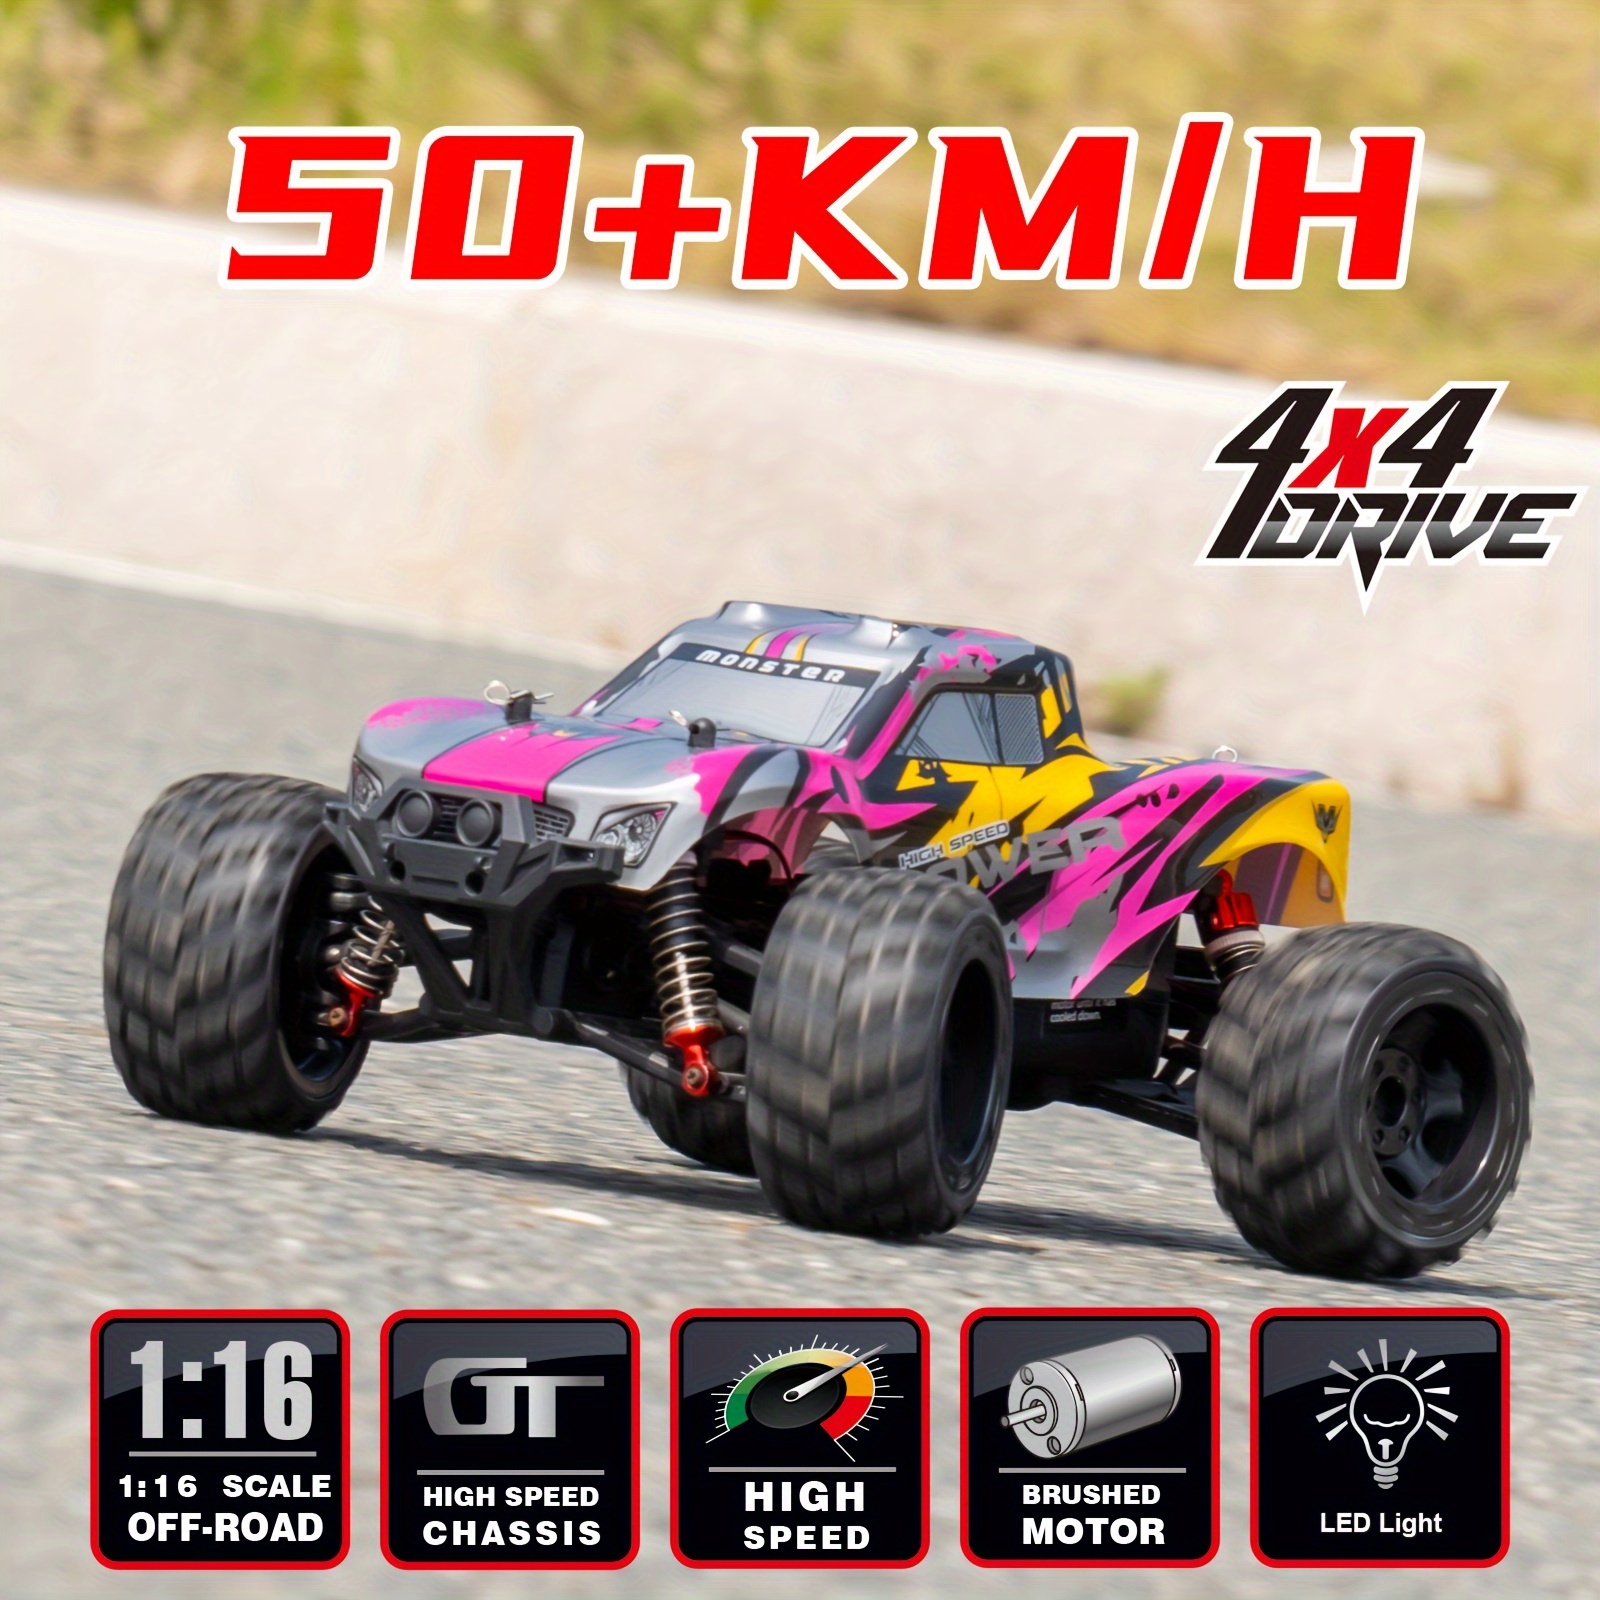 Rc Cars.sniclo 14301/14302 1:14 Rc Car 4wd Brushless High-speed